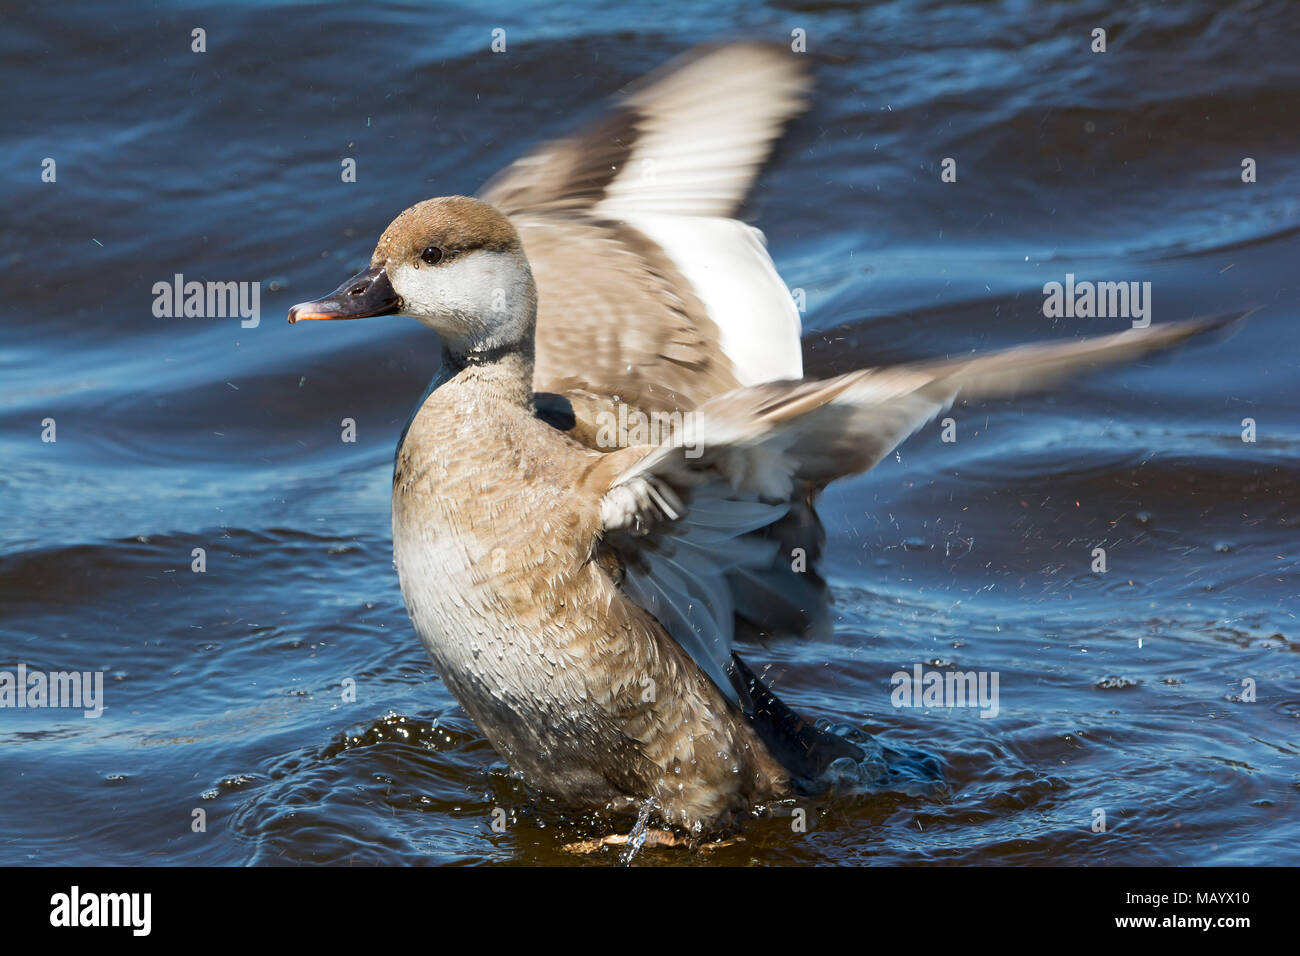 Greylag goose (Anser anser) swims in water, flapping wings, Chiemsee, Upper Bavaria, Bavaria, Germany Stock Photo